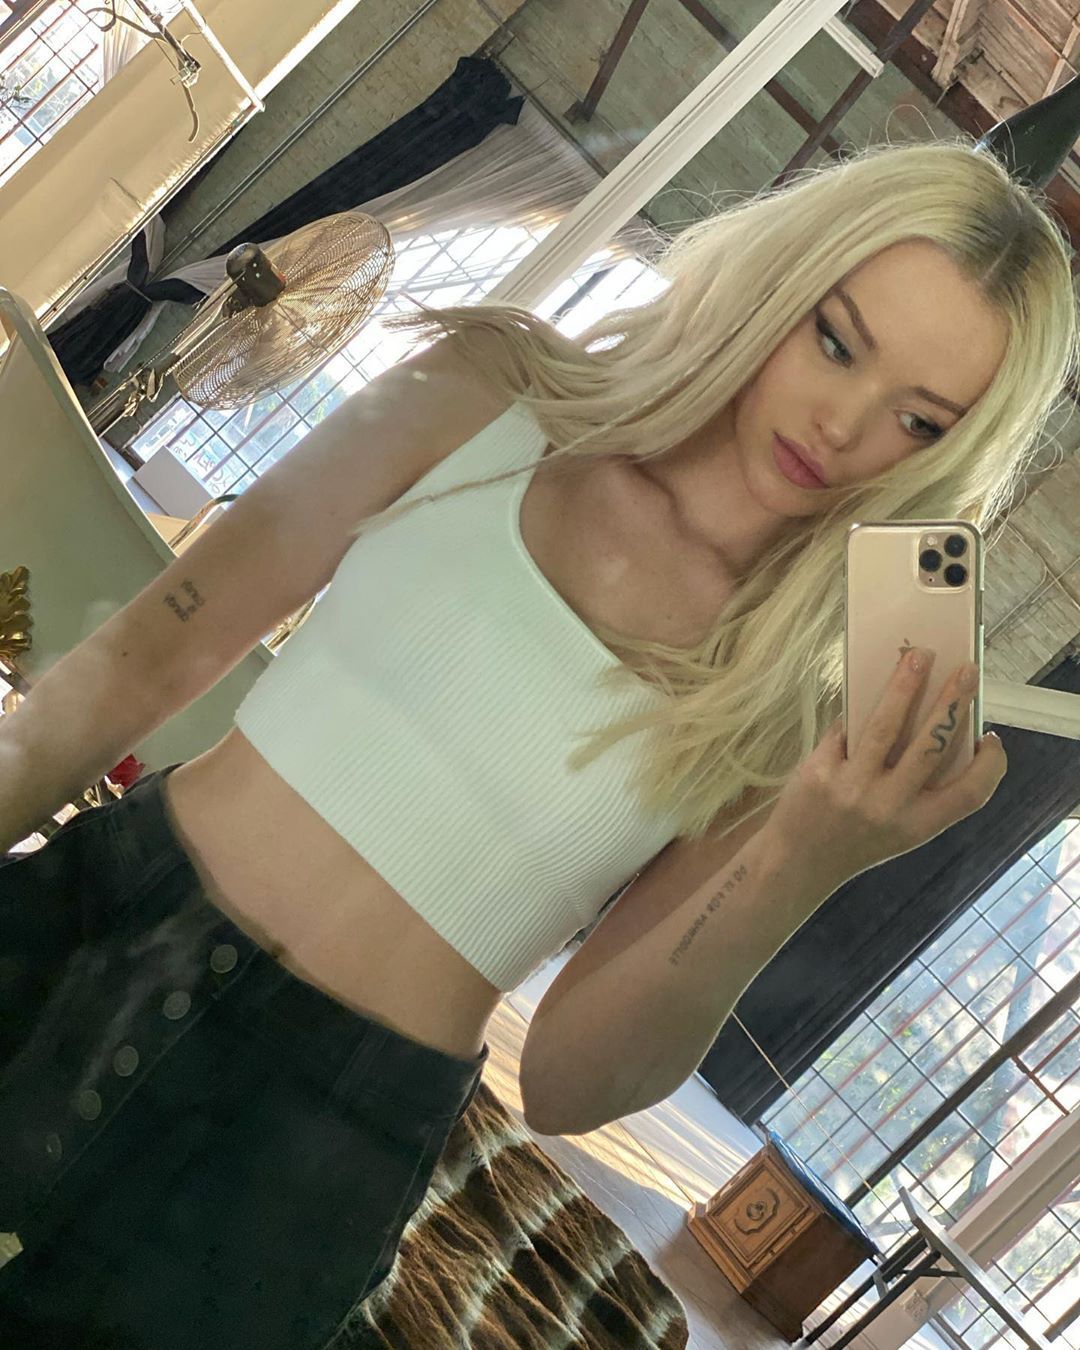 Dove Cameron Says She Was In 7th Grade And Still Had Braces When She Got First Tattoo